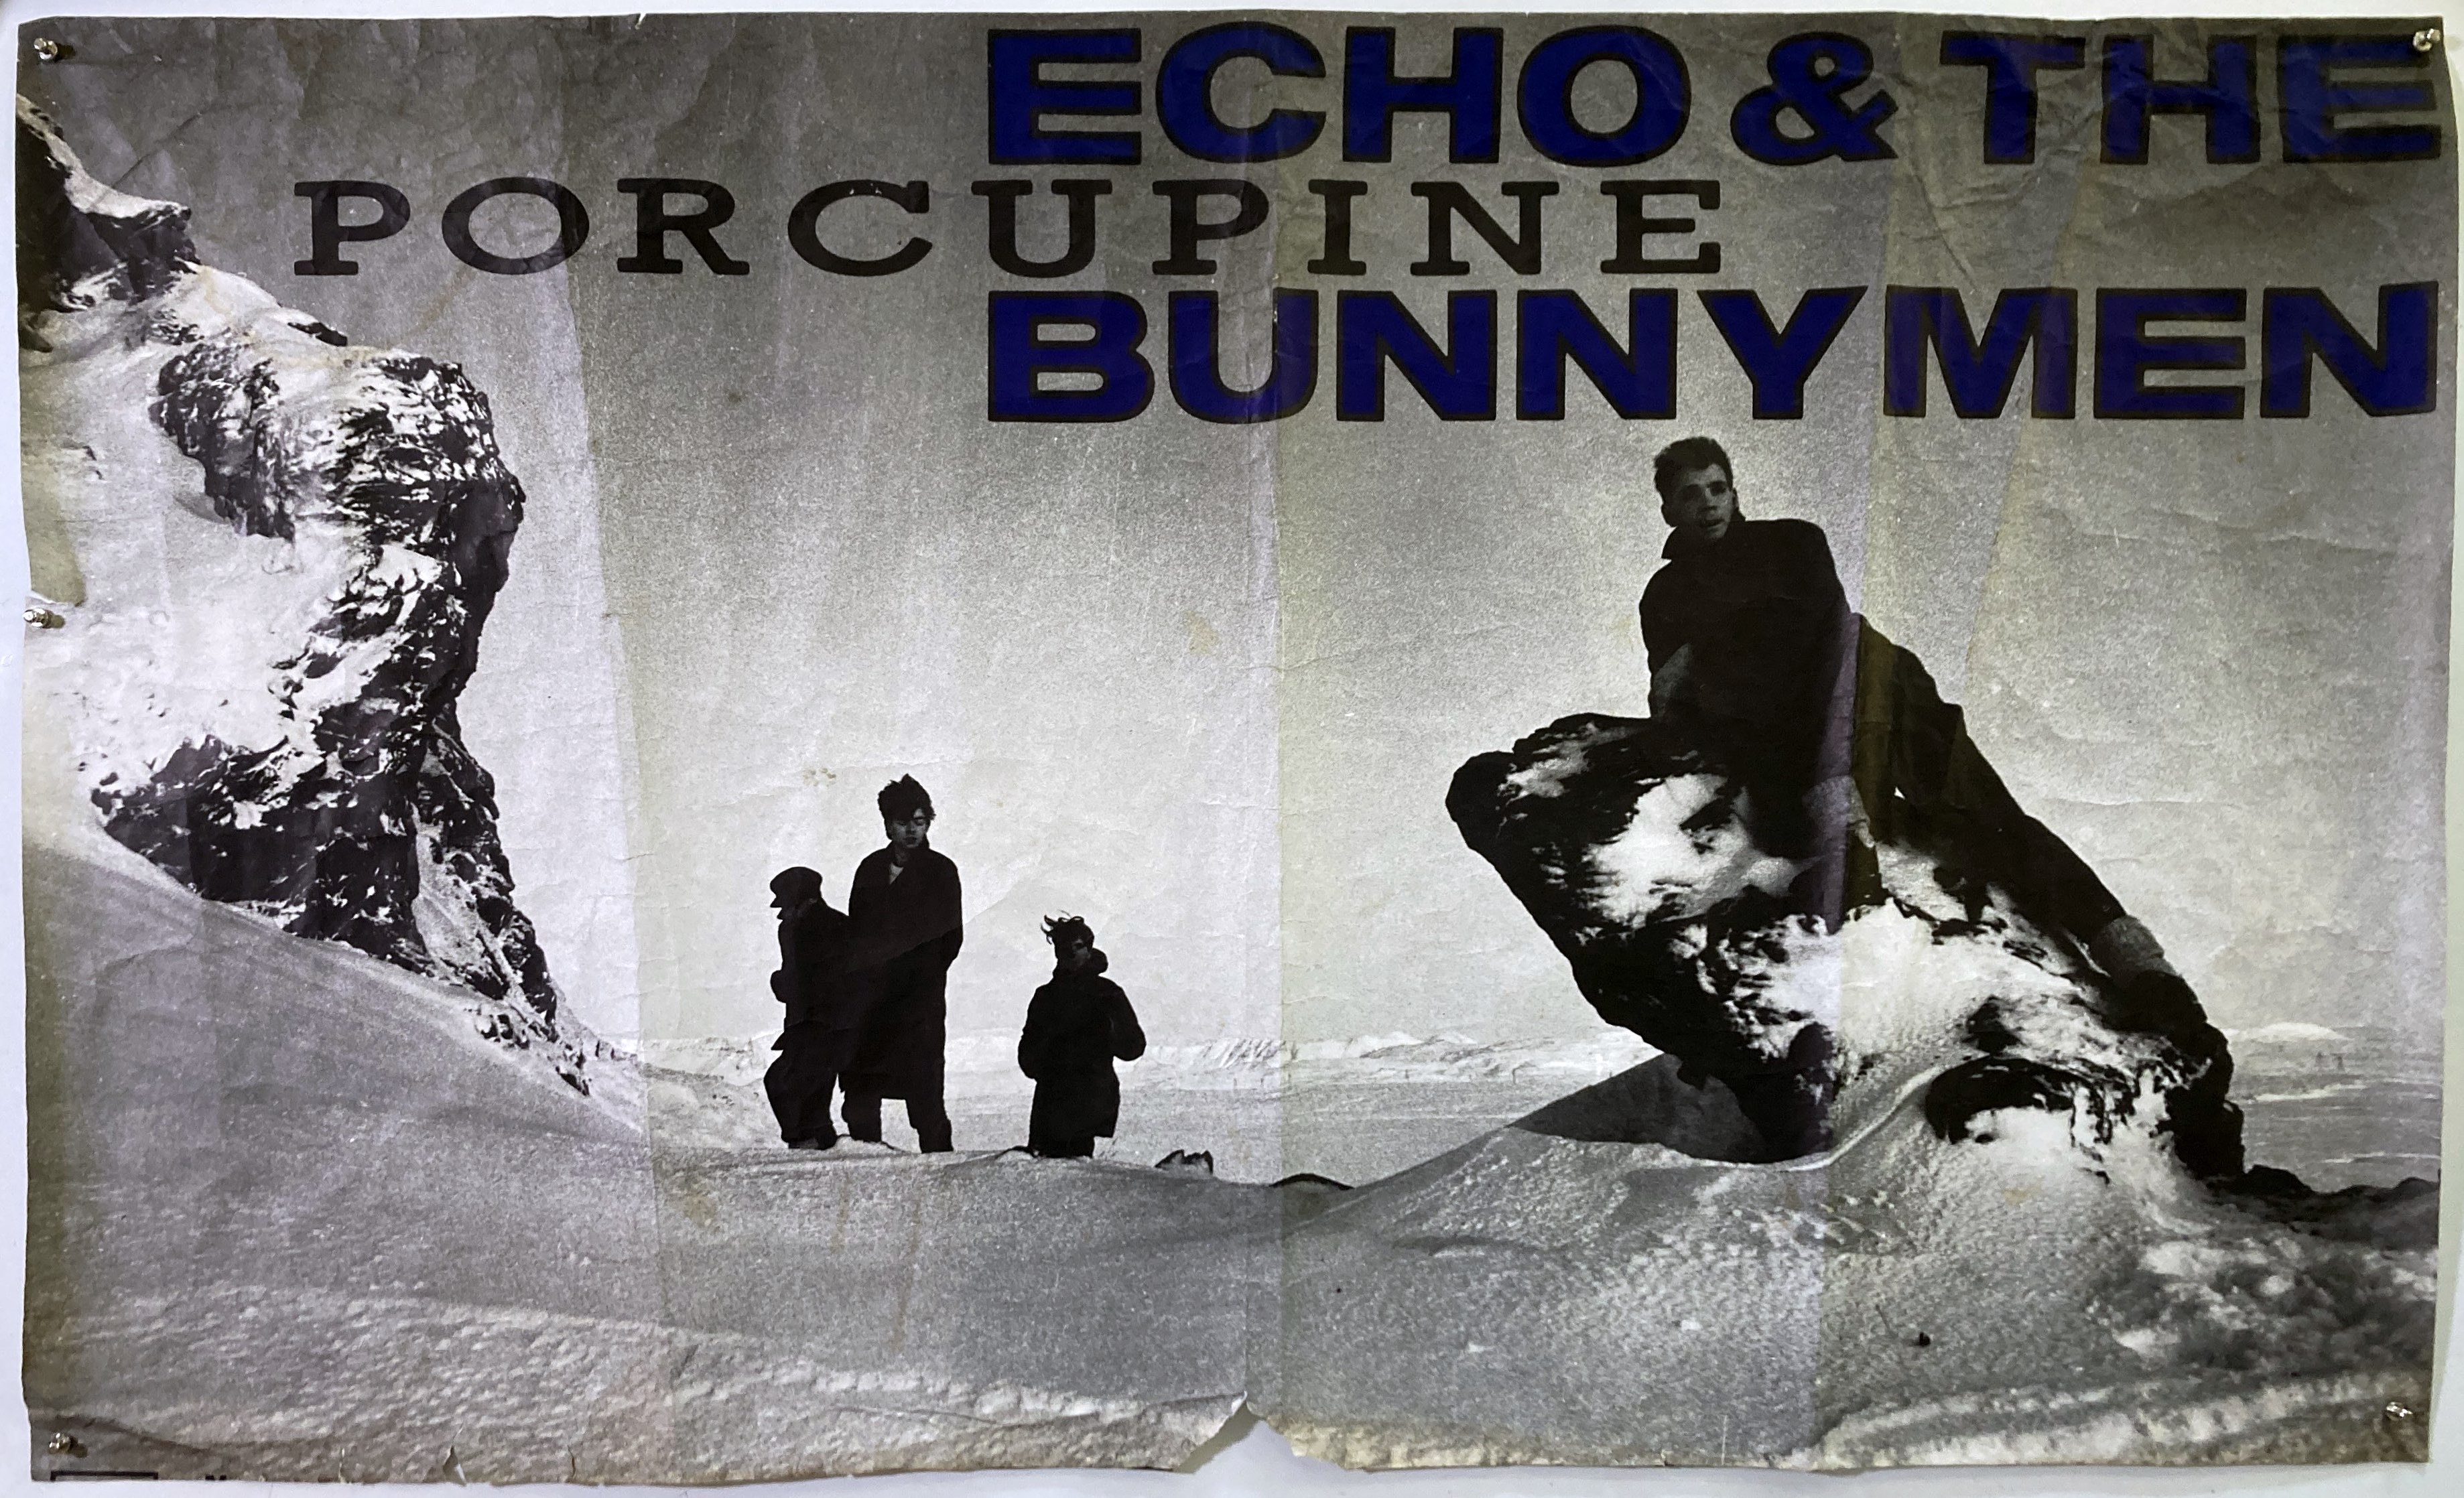 Lot 282 ECHO AND THE BUNNYMEN POSTERS.